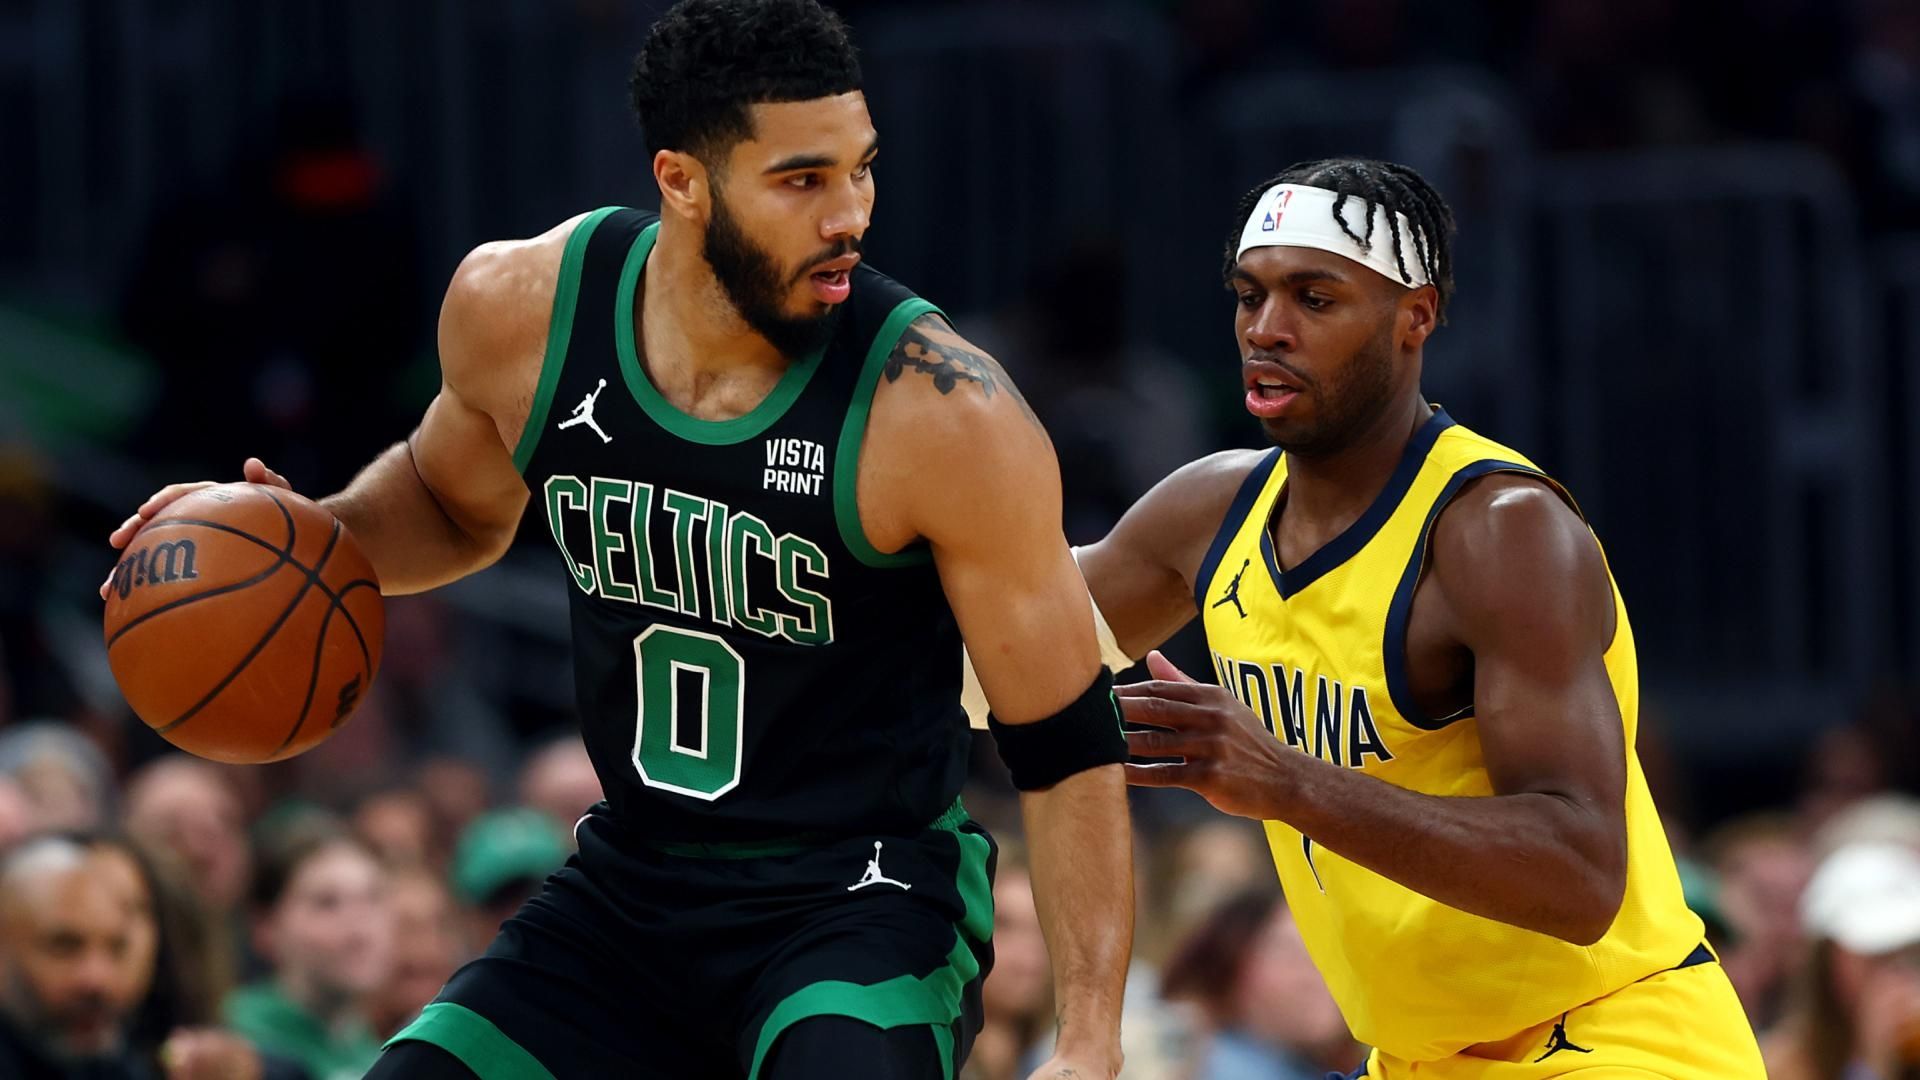 Indiana Pacers vs. Boston Celtics: Preview, Where to Watch and Betting Odds